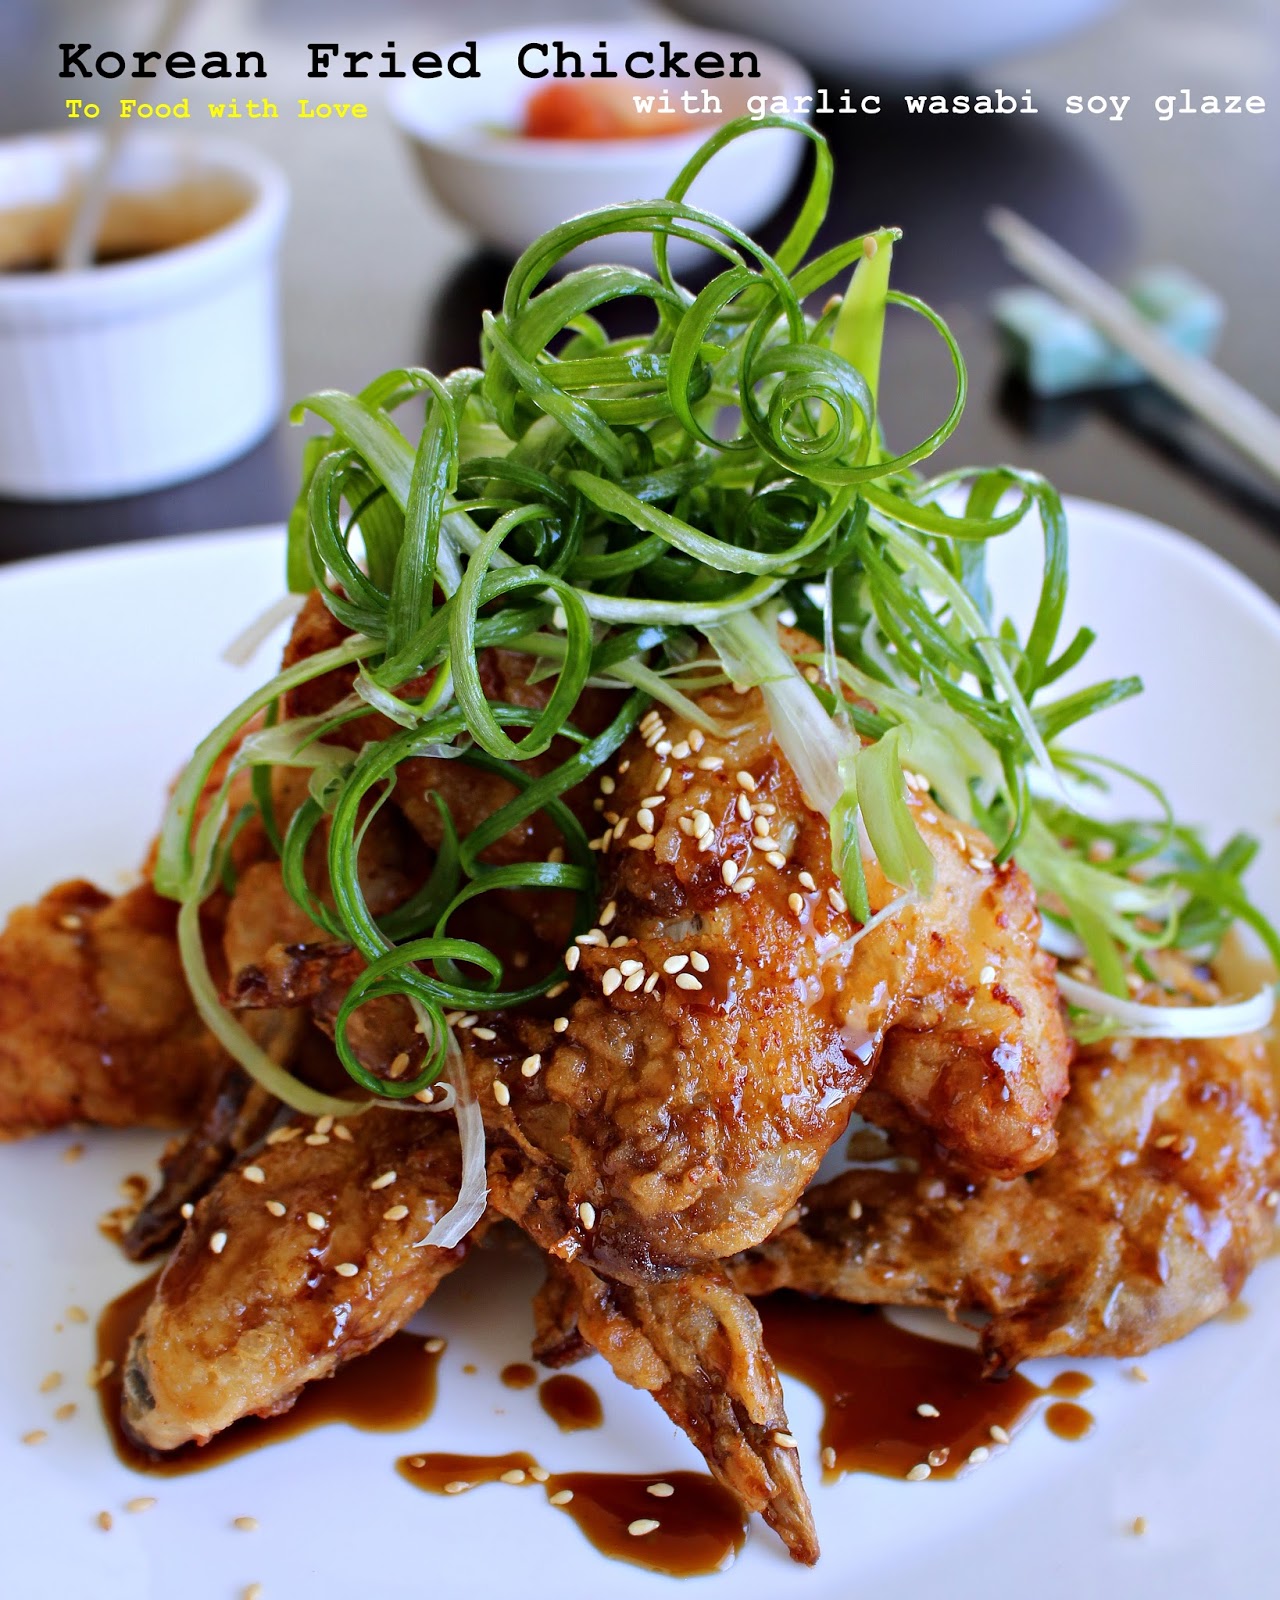 To Food with Love: Korean Fried Chicken with garlic wasabi soy glaze